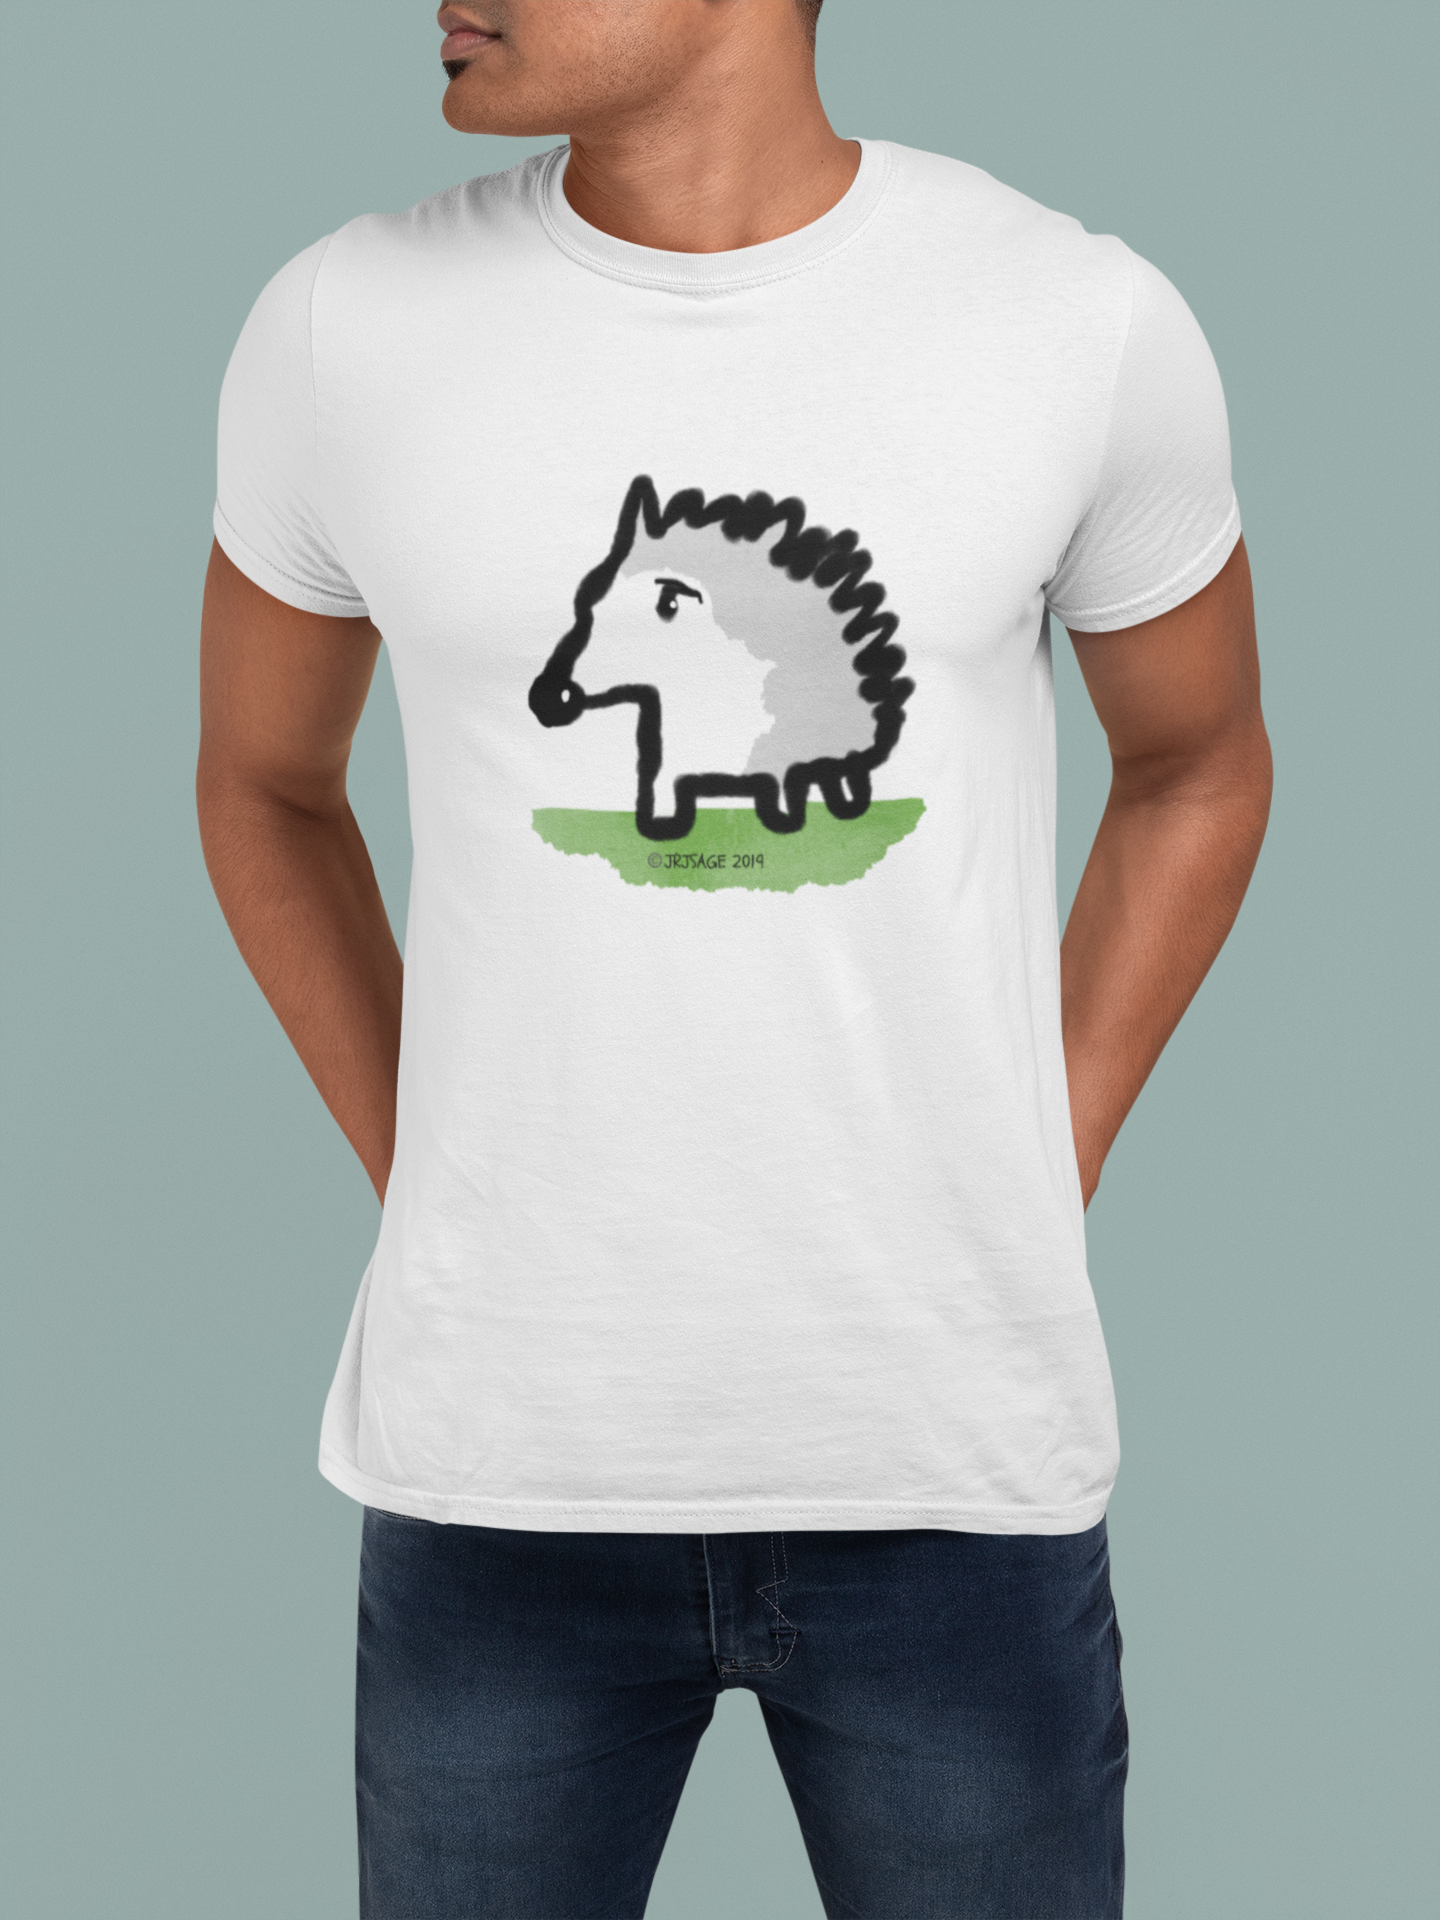 Baby Hedgehog T-shirt - Young man wearing a cute illustrated hedgehog t-shirt in white vegan cotton by Hector and Bone